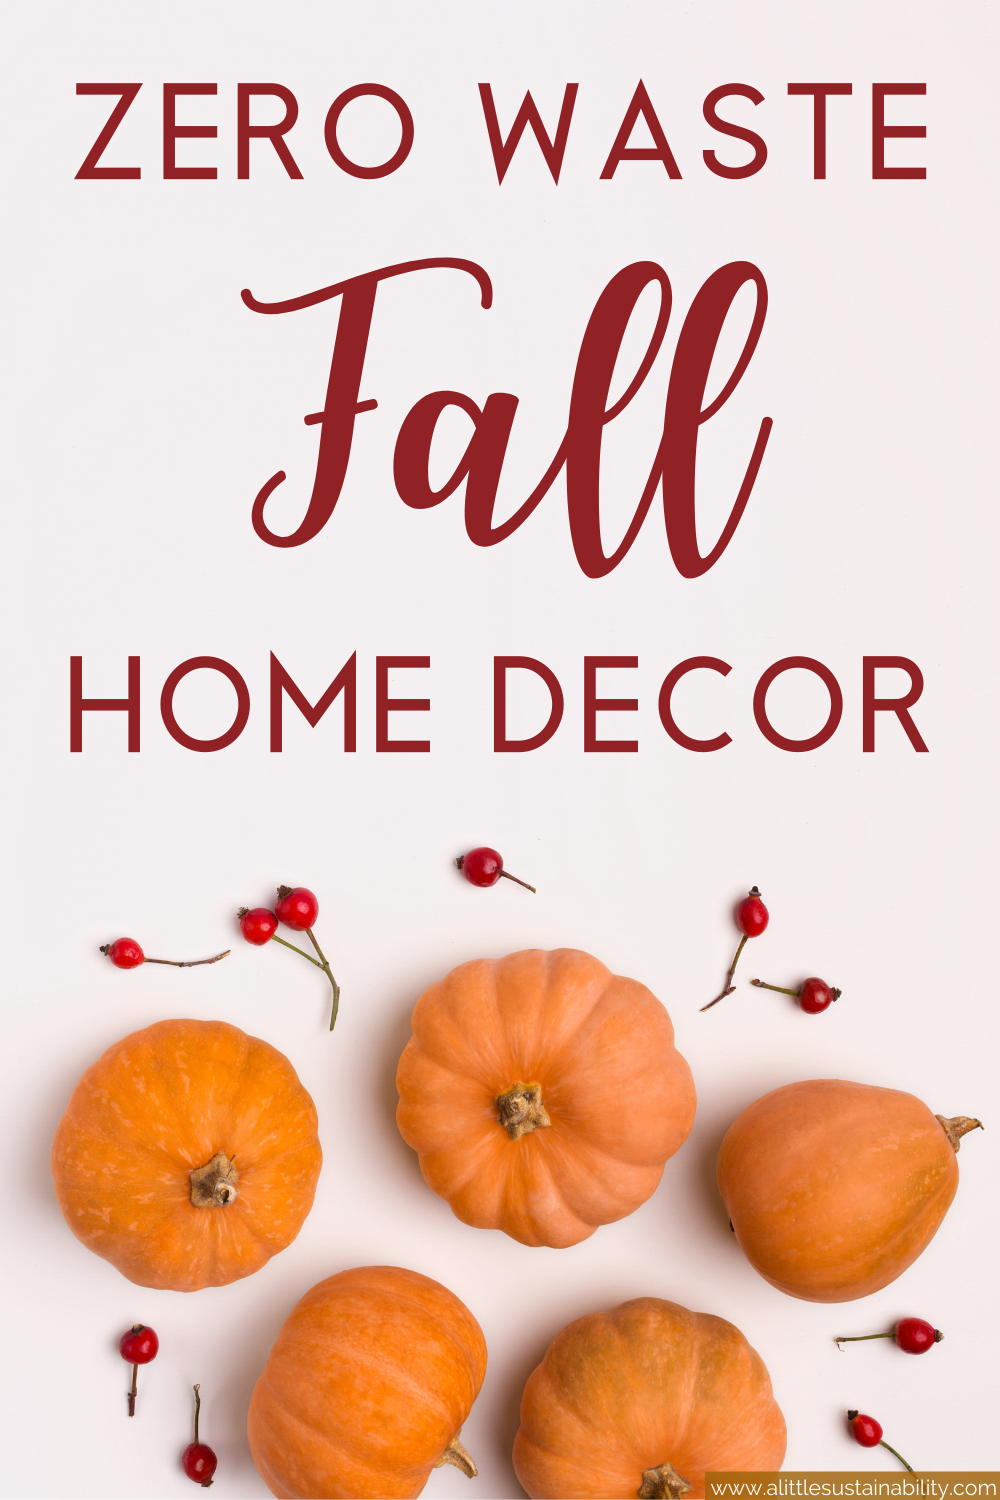 Fill your home with sustainable decor to celebrate the Fall season. From using nature like twigs, leaves, and pumpkins, to finding sustainable decor on Etsy and Target. An eco-friendly fall is on the way. Learn more at www.alittlesustainablitity.com